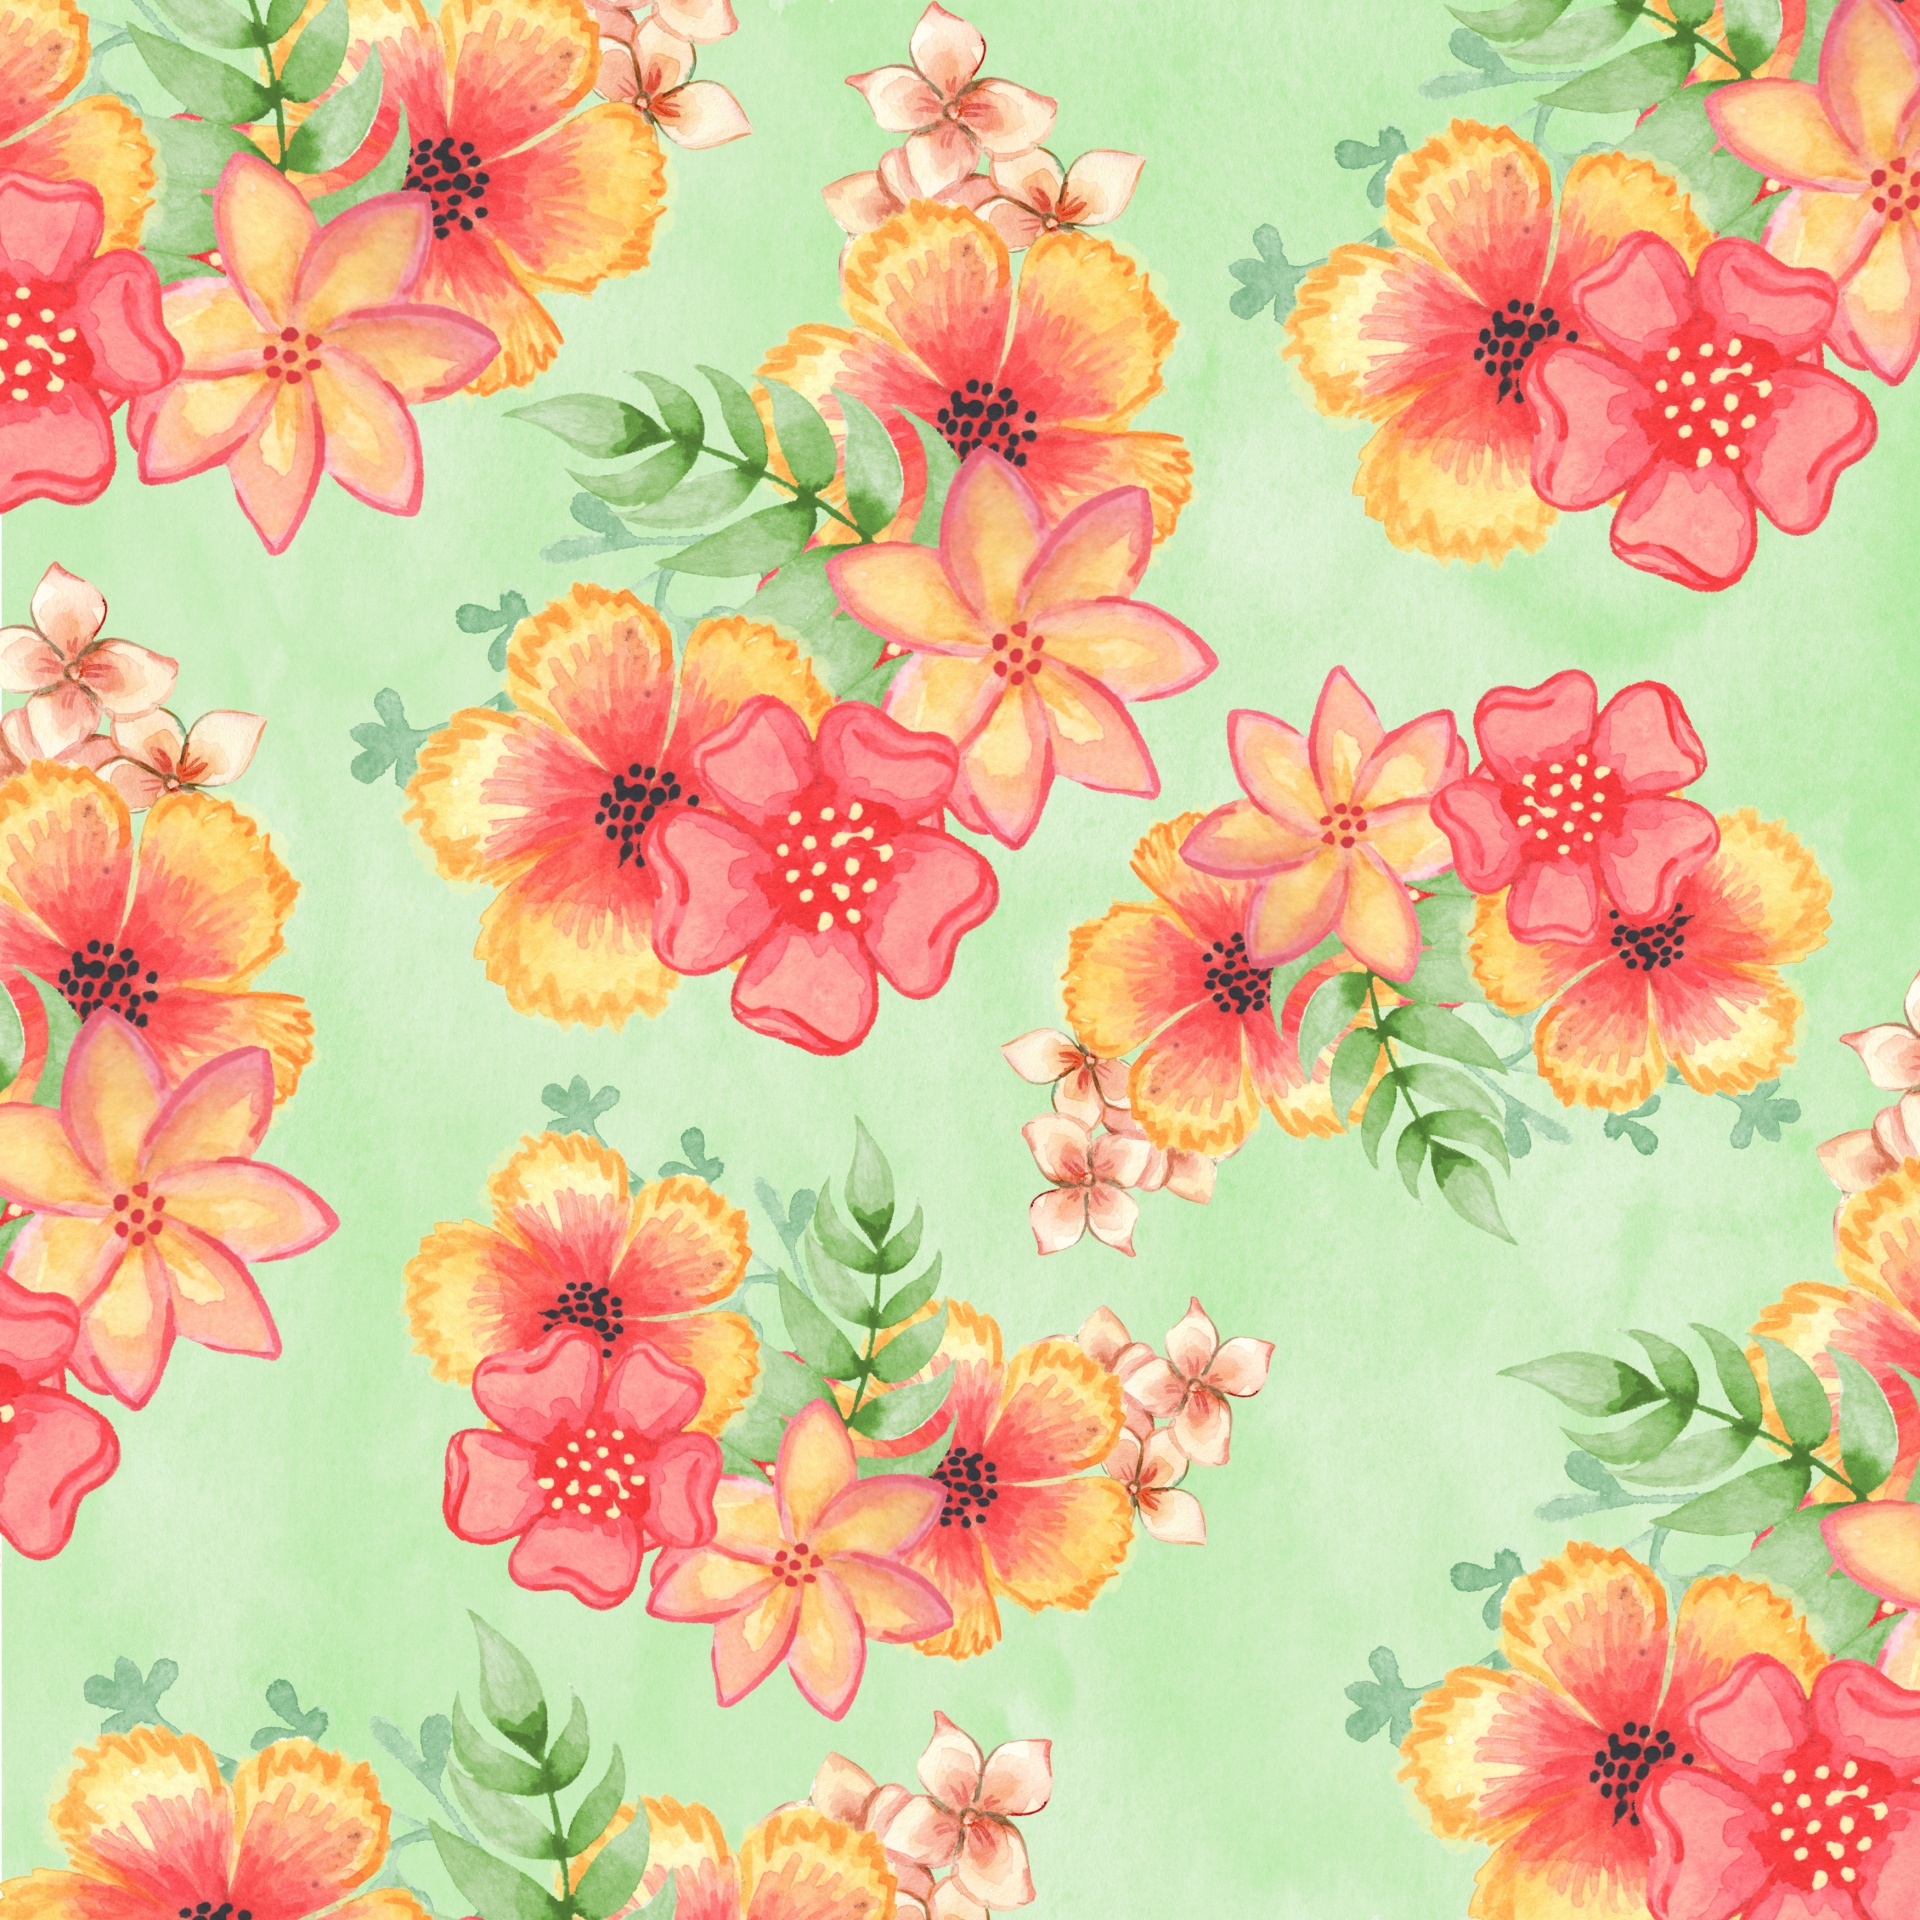 Tropical flowers watercolor seamless wallpaper background pattern